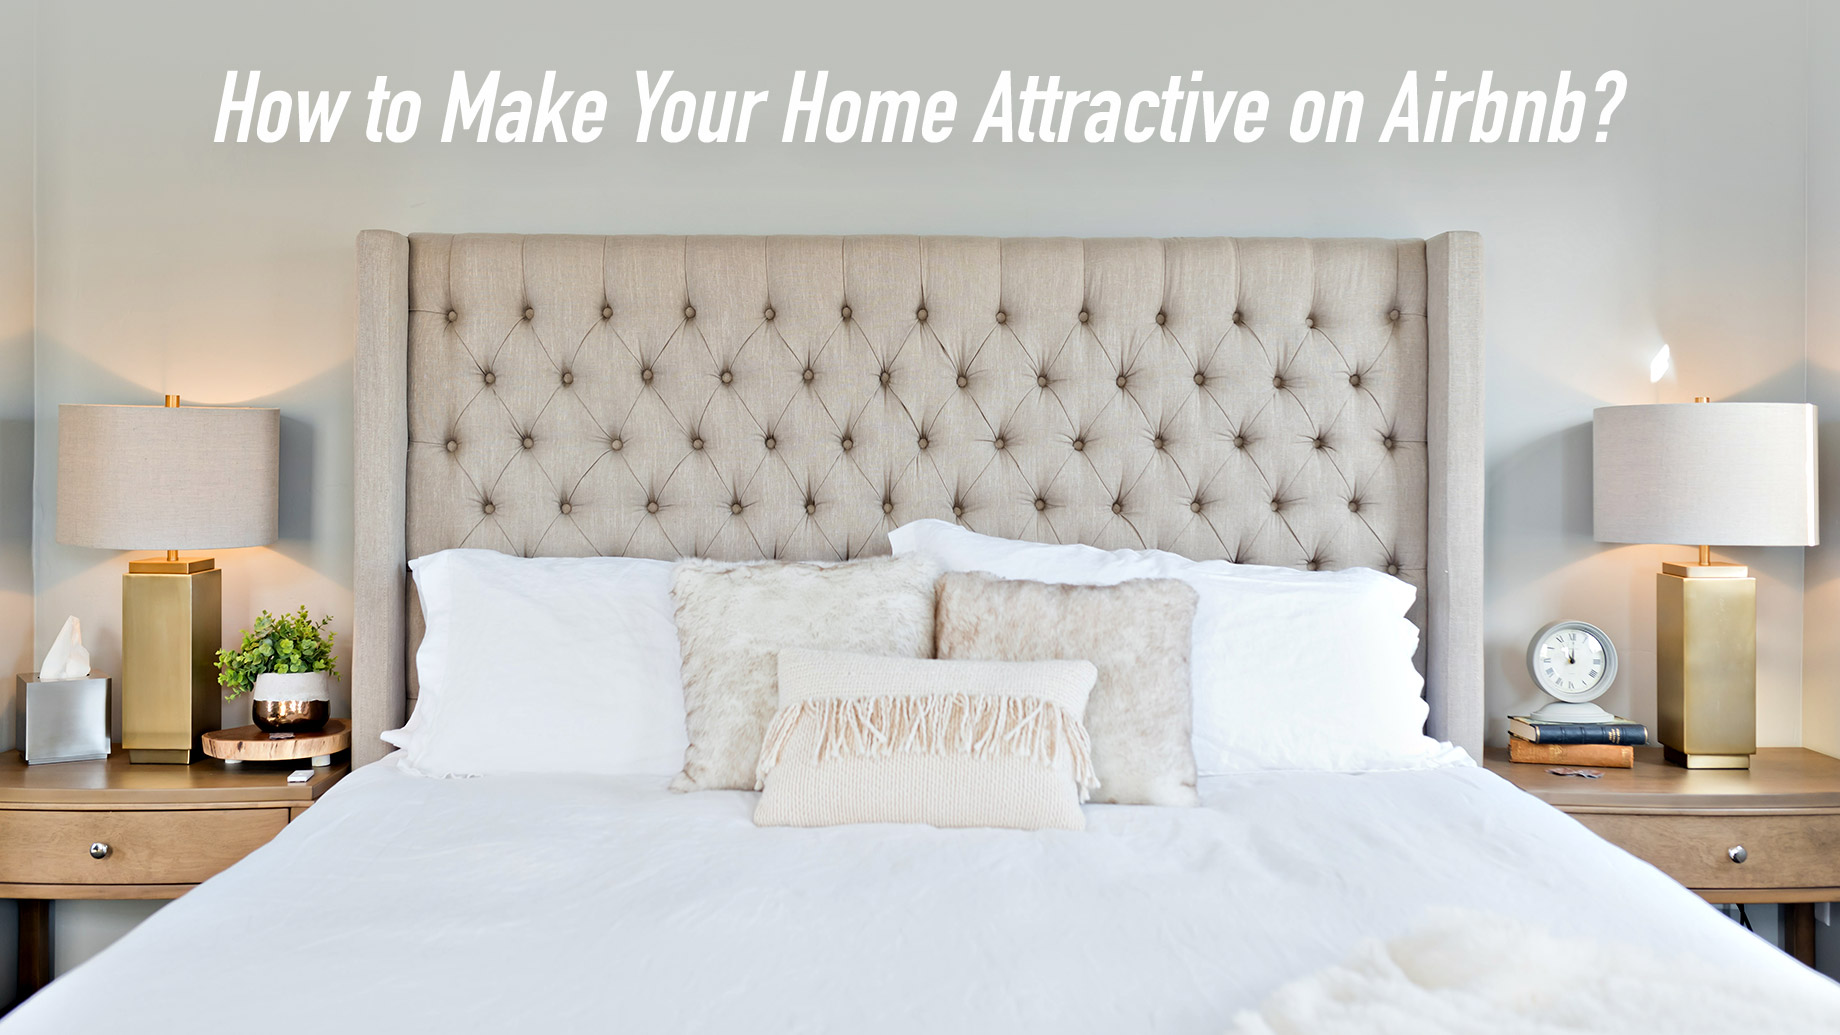 How to Make Your Home Attractive on Airbnb?